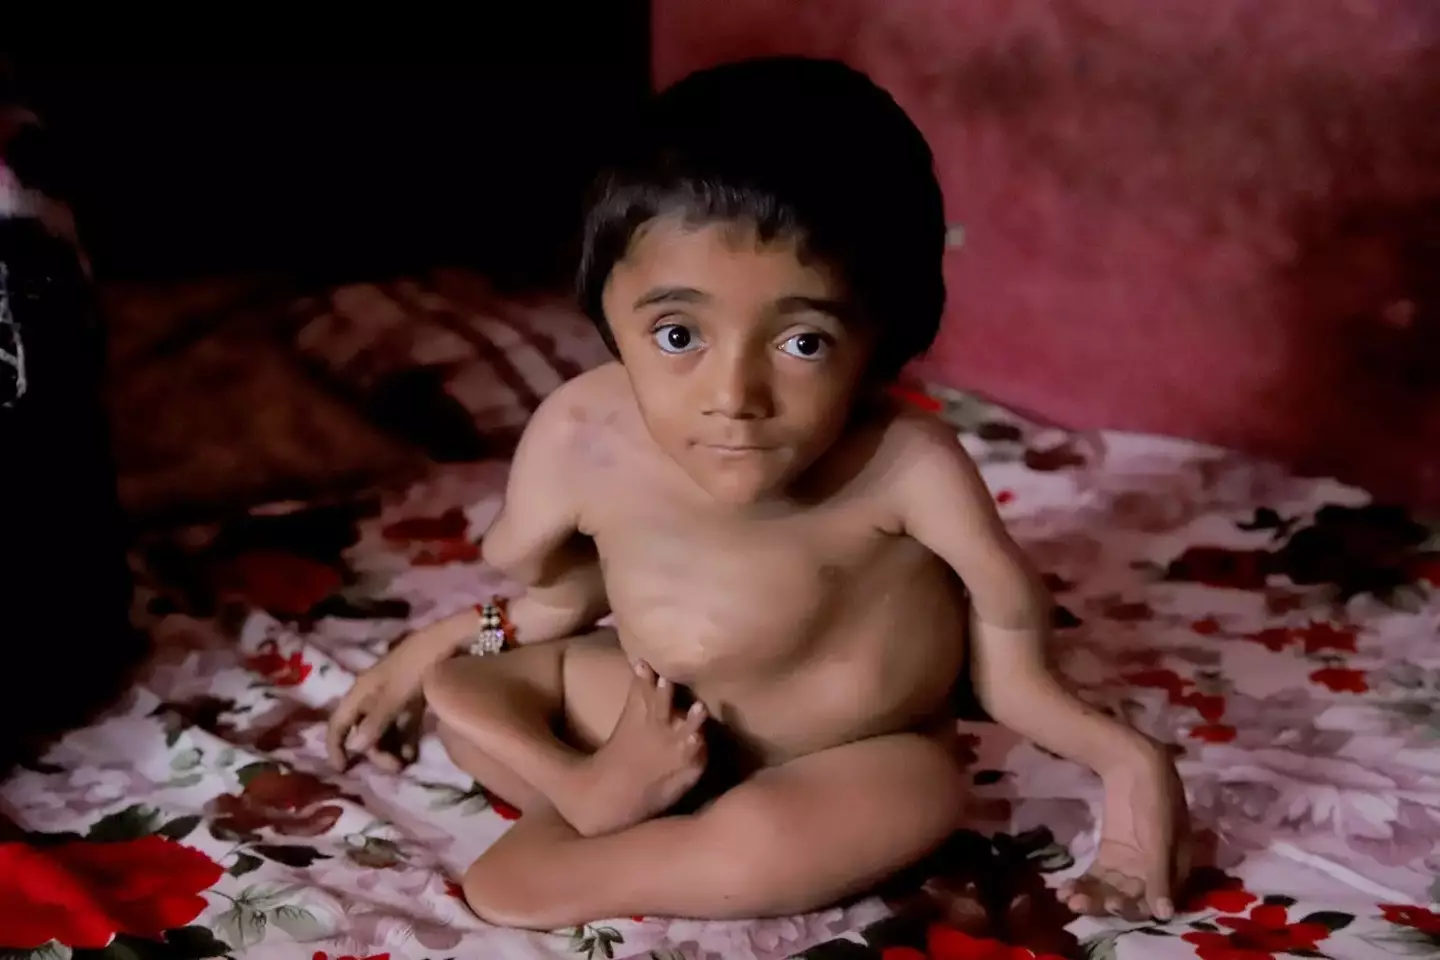 12-year-old Rohit suffers from osteogenesis imperfecta.